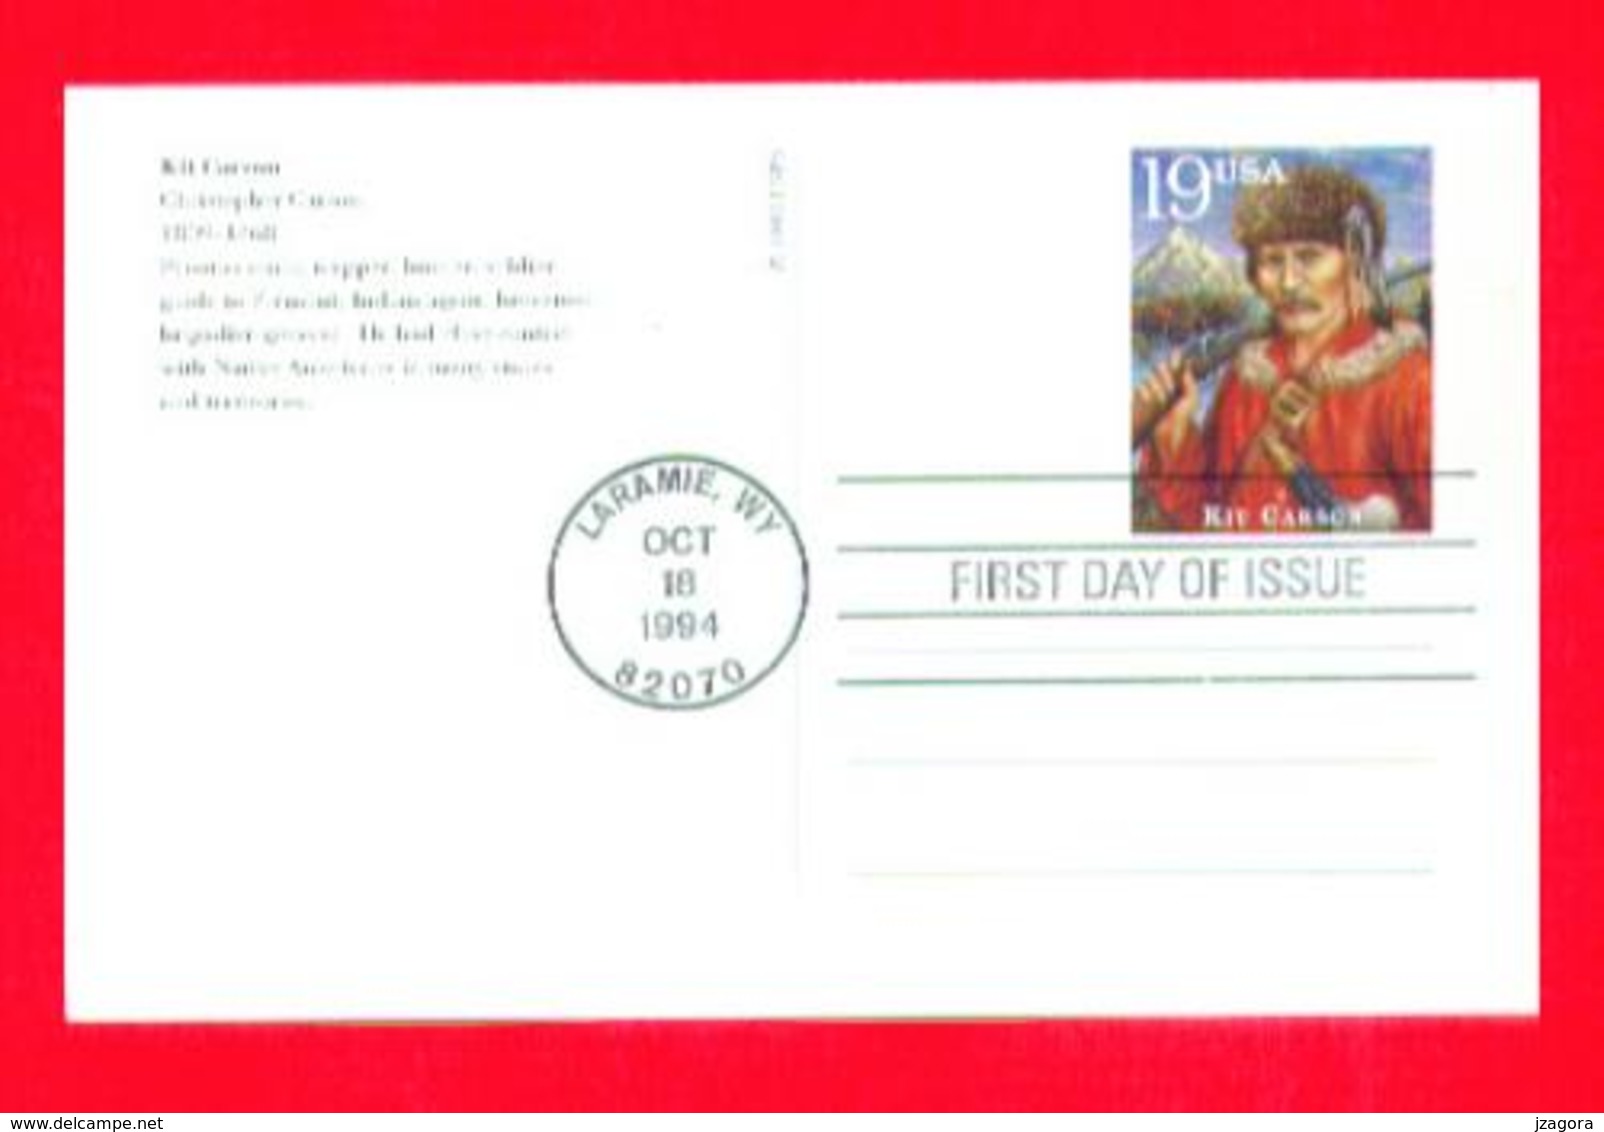 LEGENDS OF WILD WEST - KIT CARSON USA 1994 FDC UX 191 PRE-PAID POST CARD Law  Prepaid - Indianer